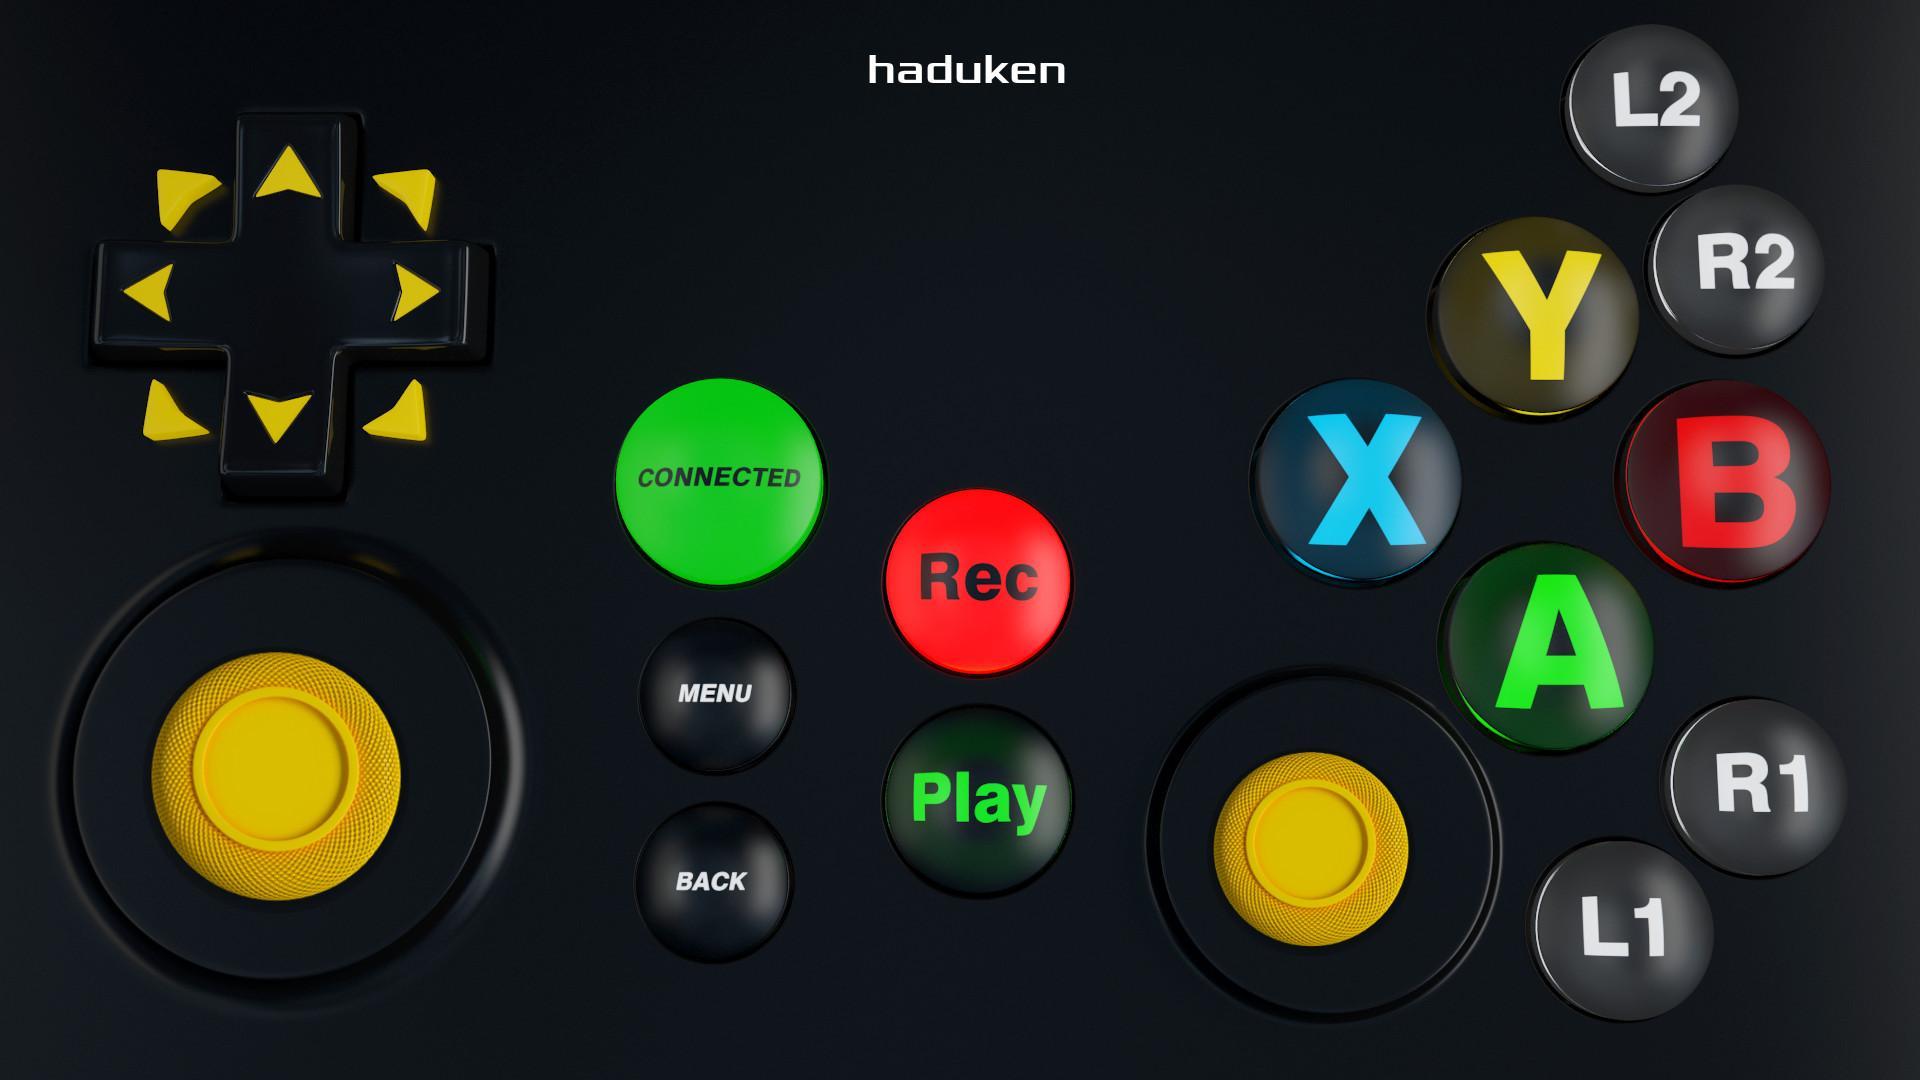 Gamepad Joystick Maxjoypad For Android Apk Download